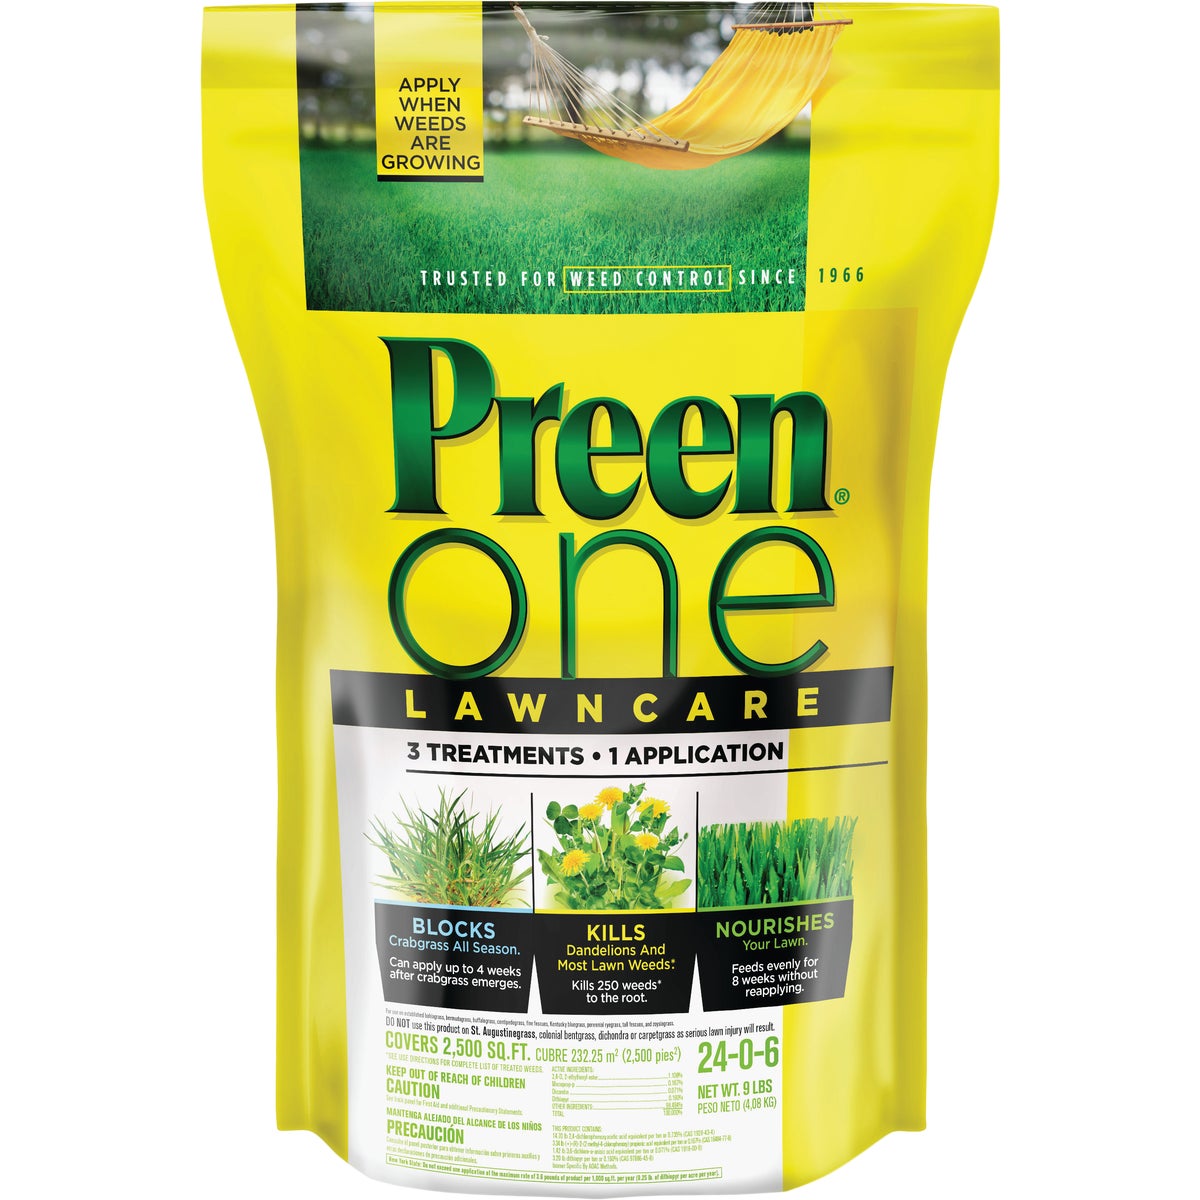 Preen One Lawn Care 9 Lb. Ready To Use Granules Weed Killer with Fertilizer